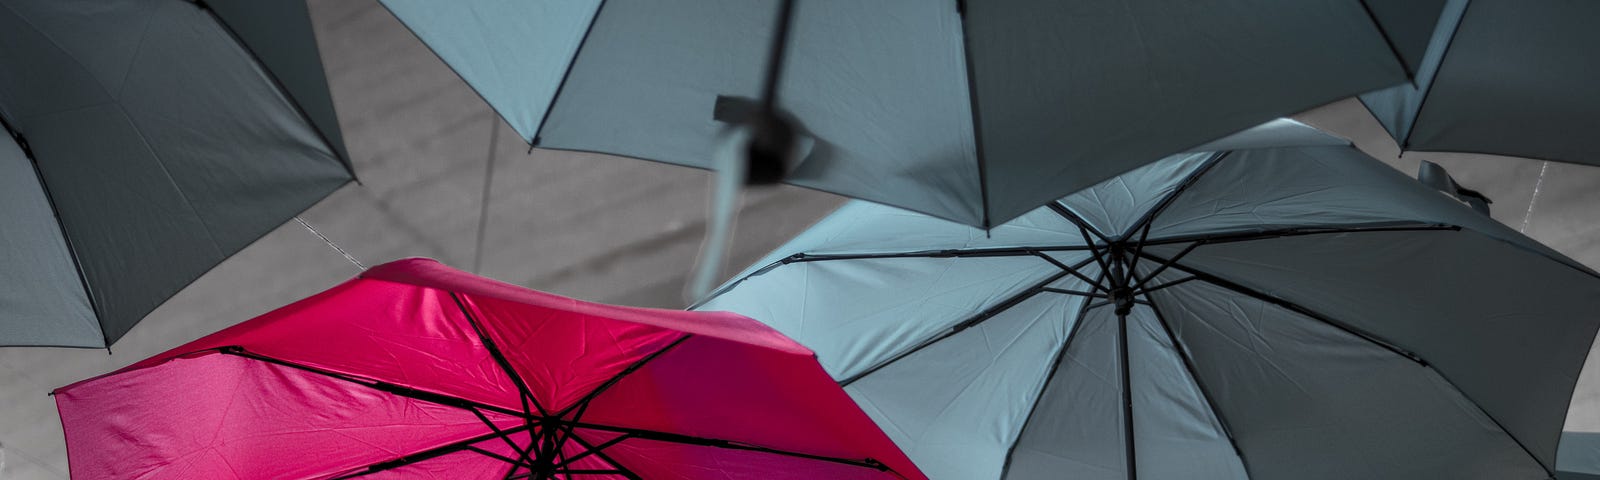 Red umbrella representing different and unique and how each person is special